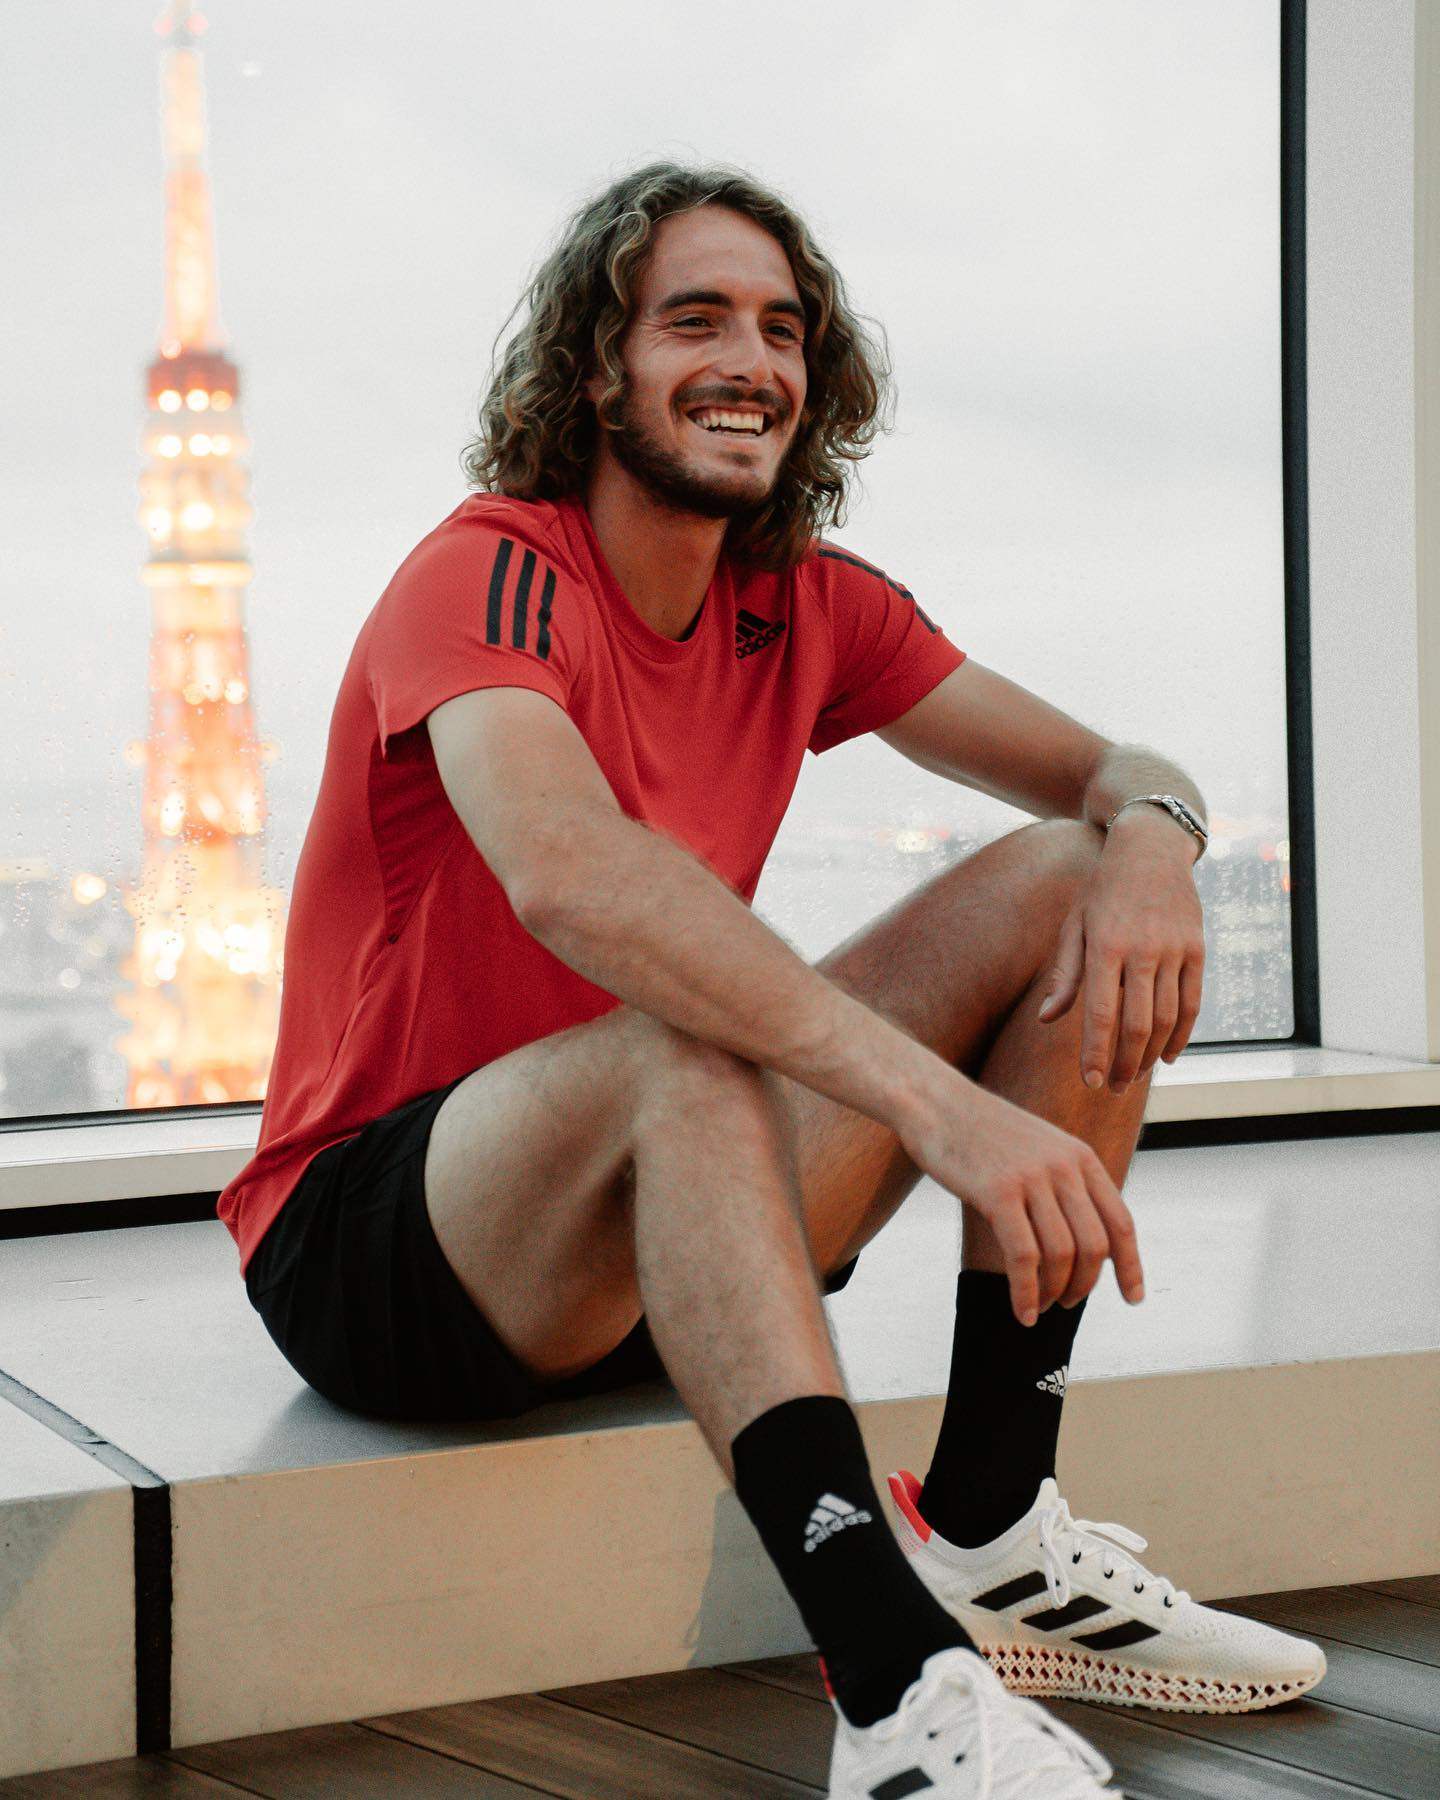 Stefanos Tsitsipas’ ability to not take himself too seriously off court is winning him plenty of fans too. Photo: @stefanostsitsipas98/Instagram